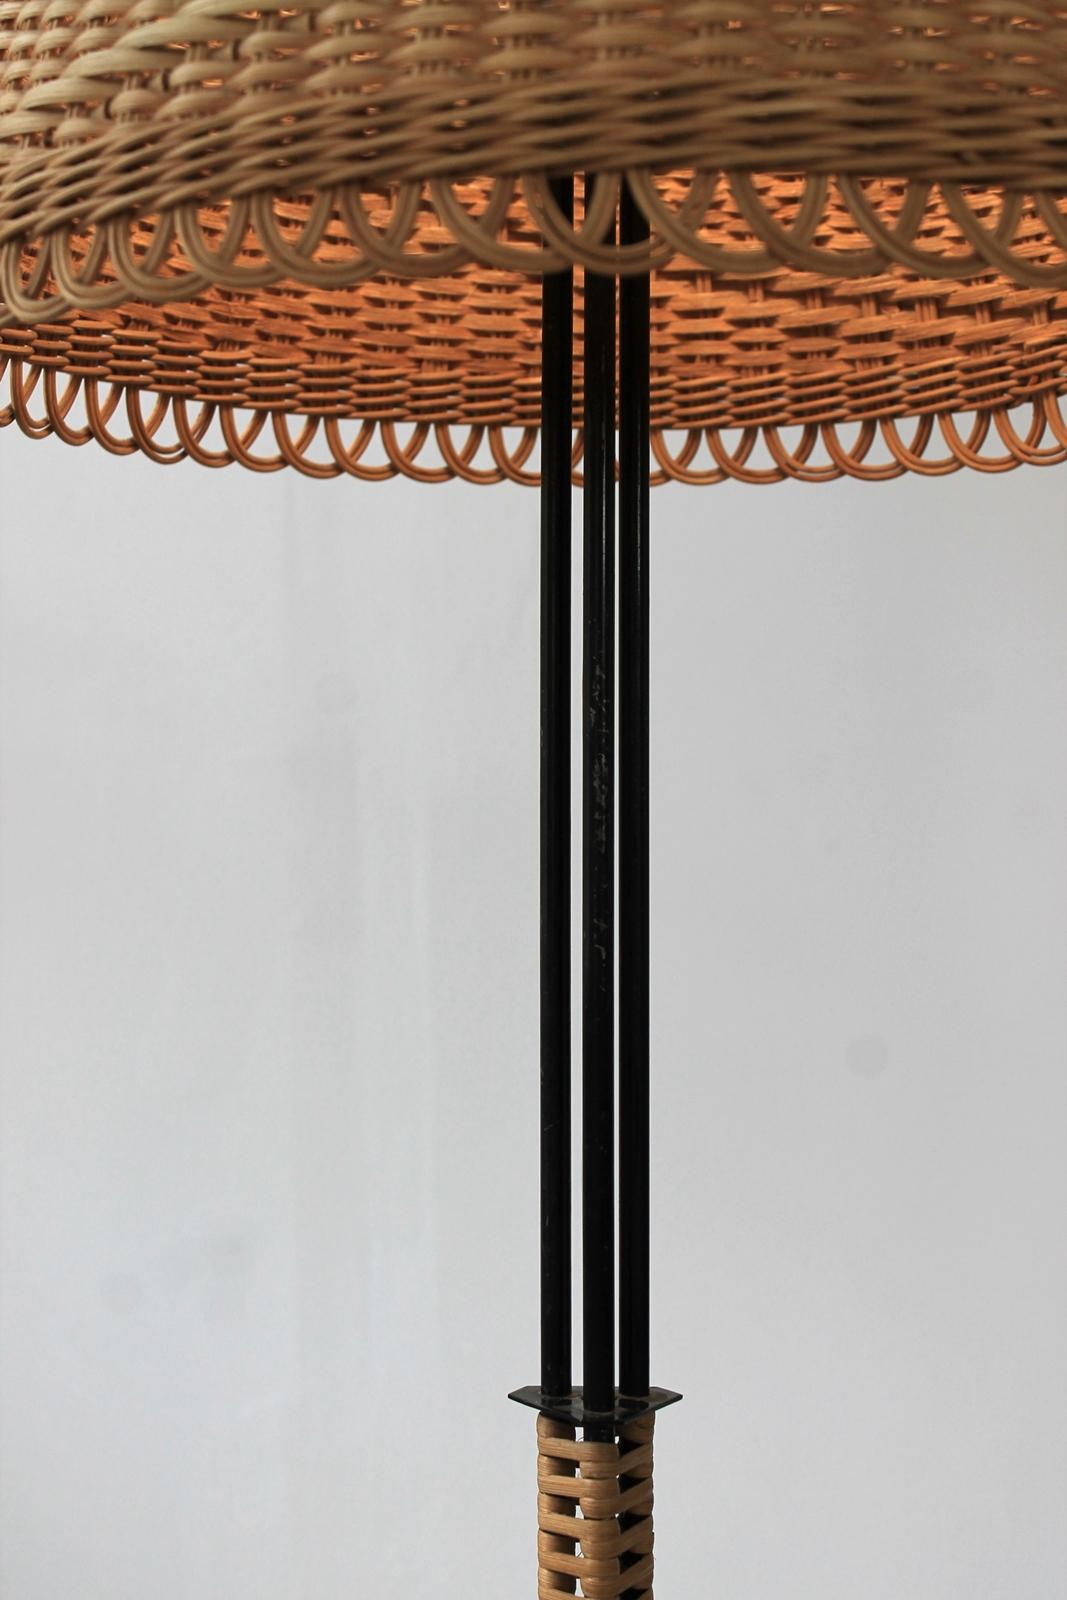 Enameled Unique Hungarian Modernist Iron and Wicker Floor Lamp, 1950s